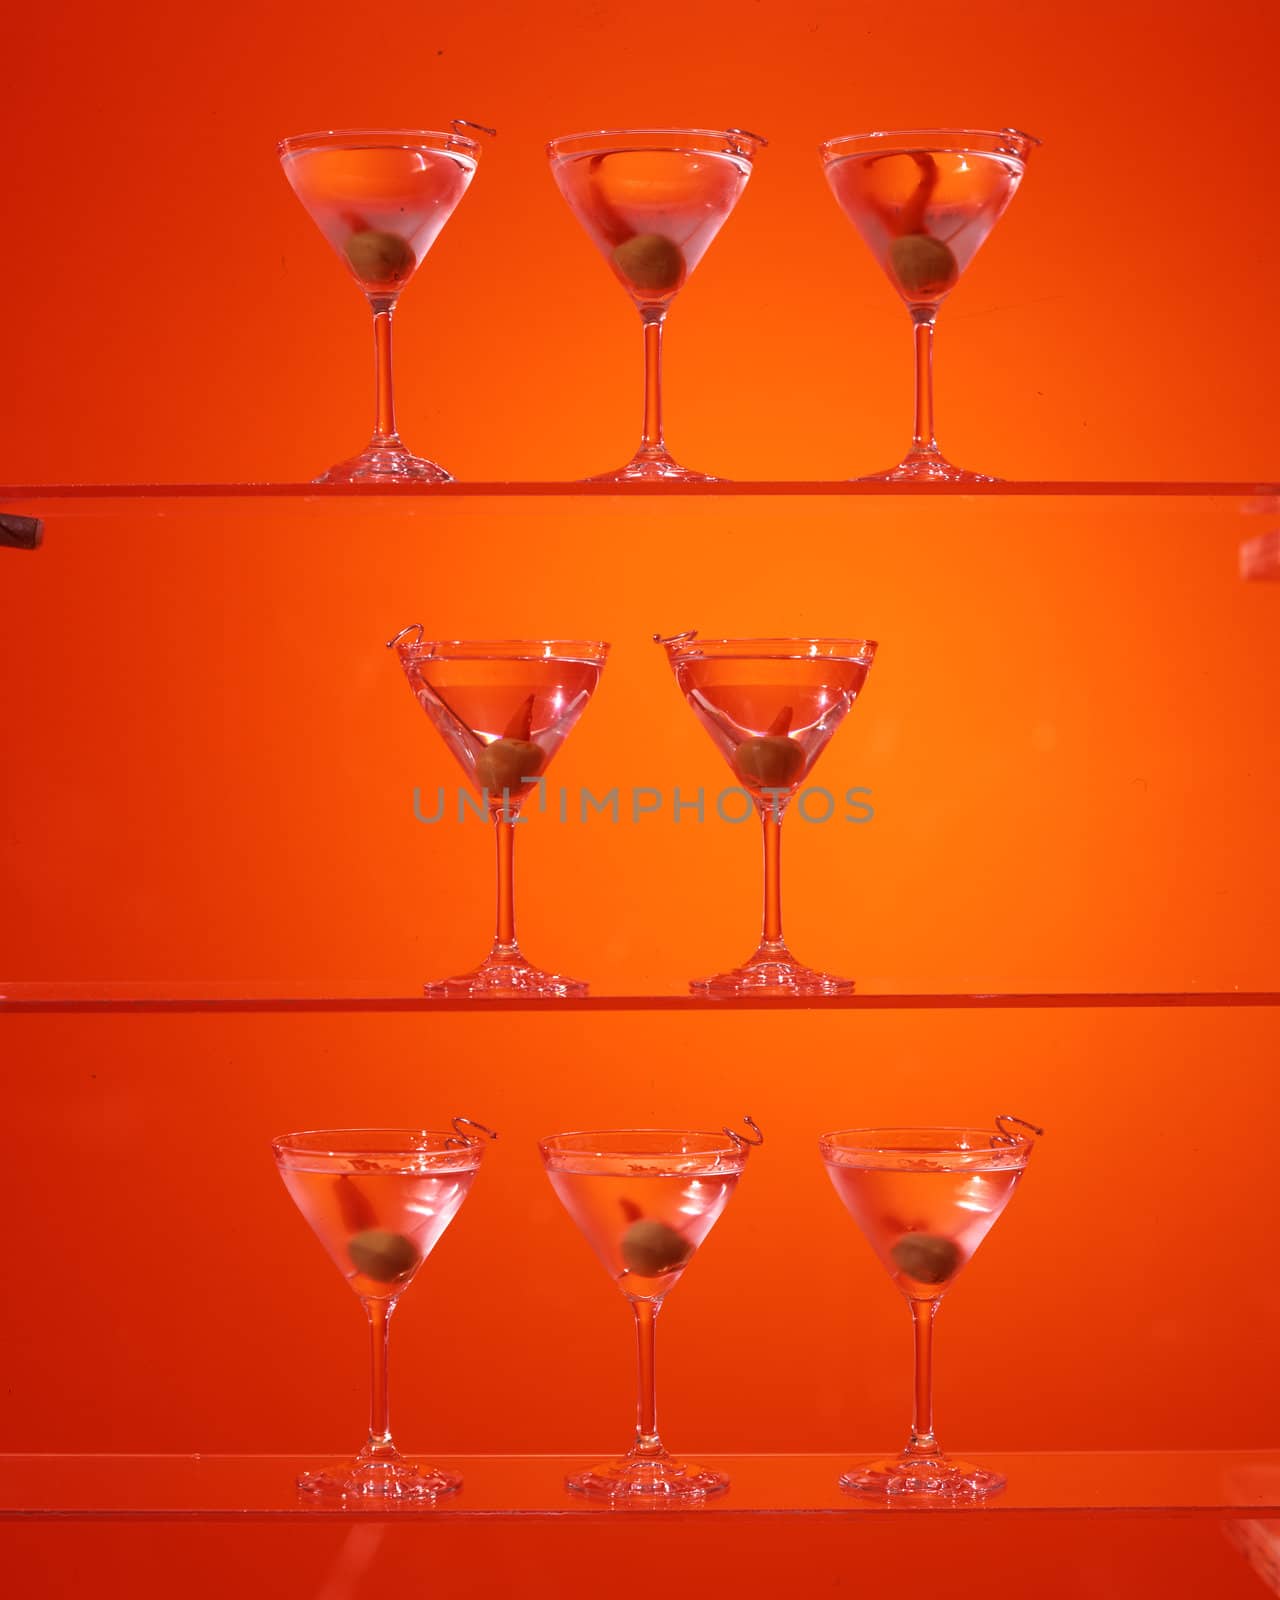 Three shelves with martinis on red
